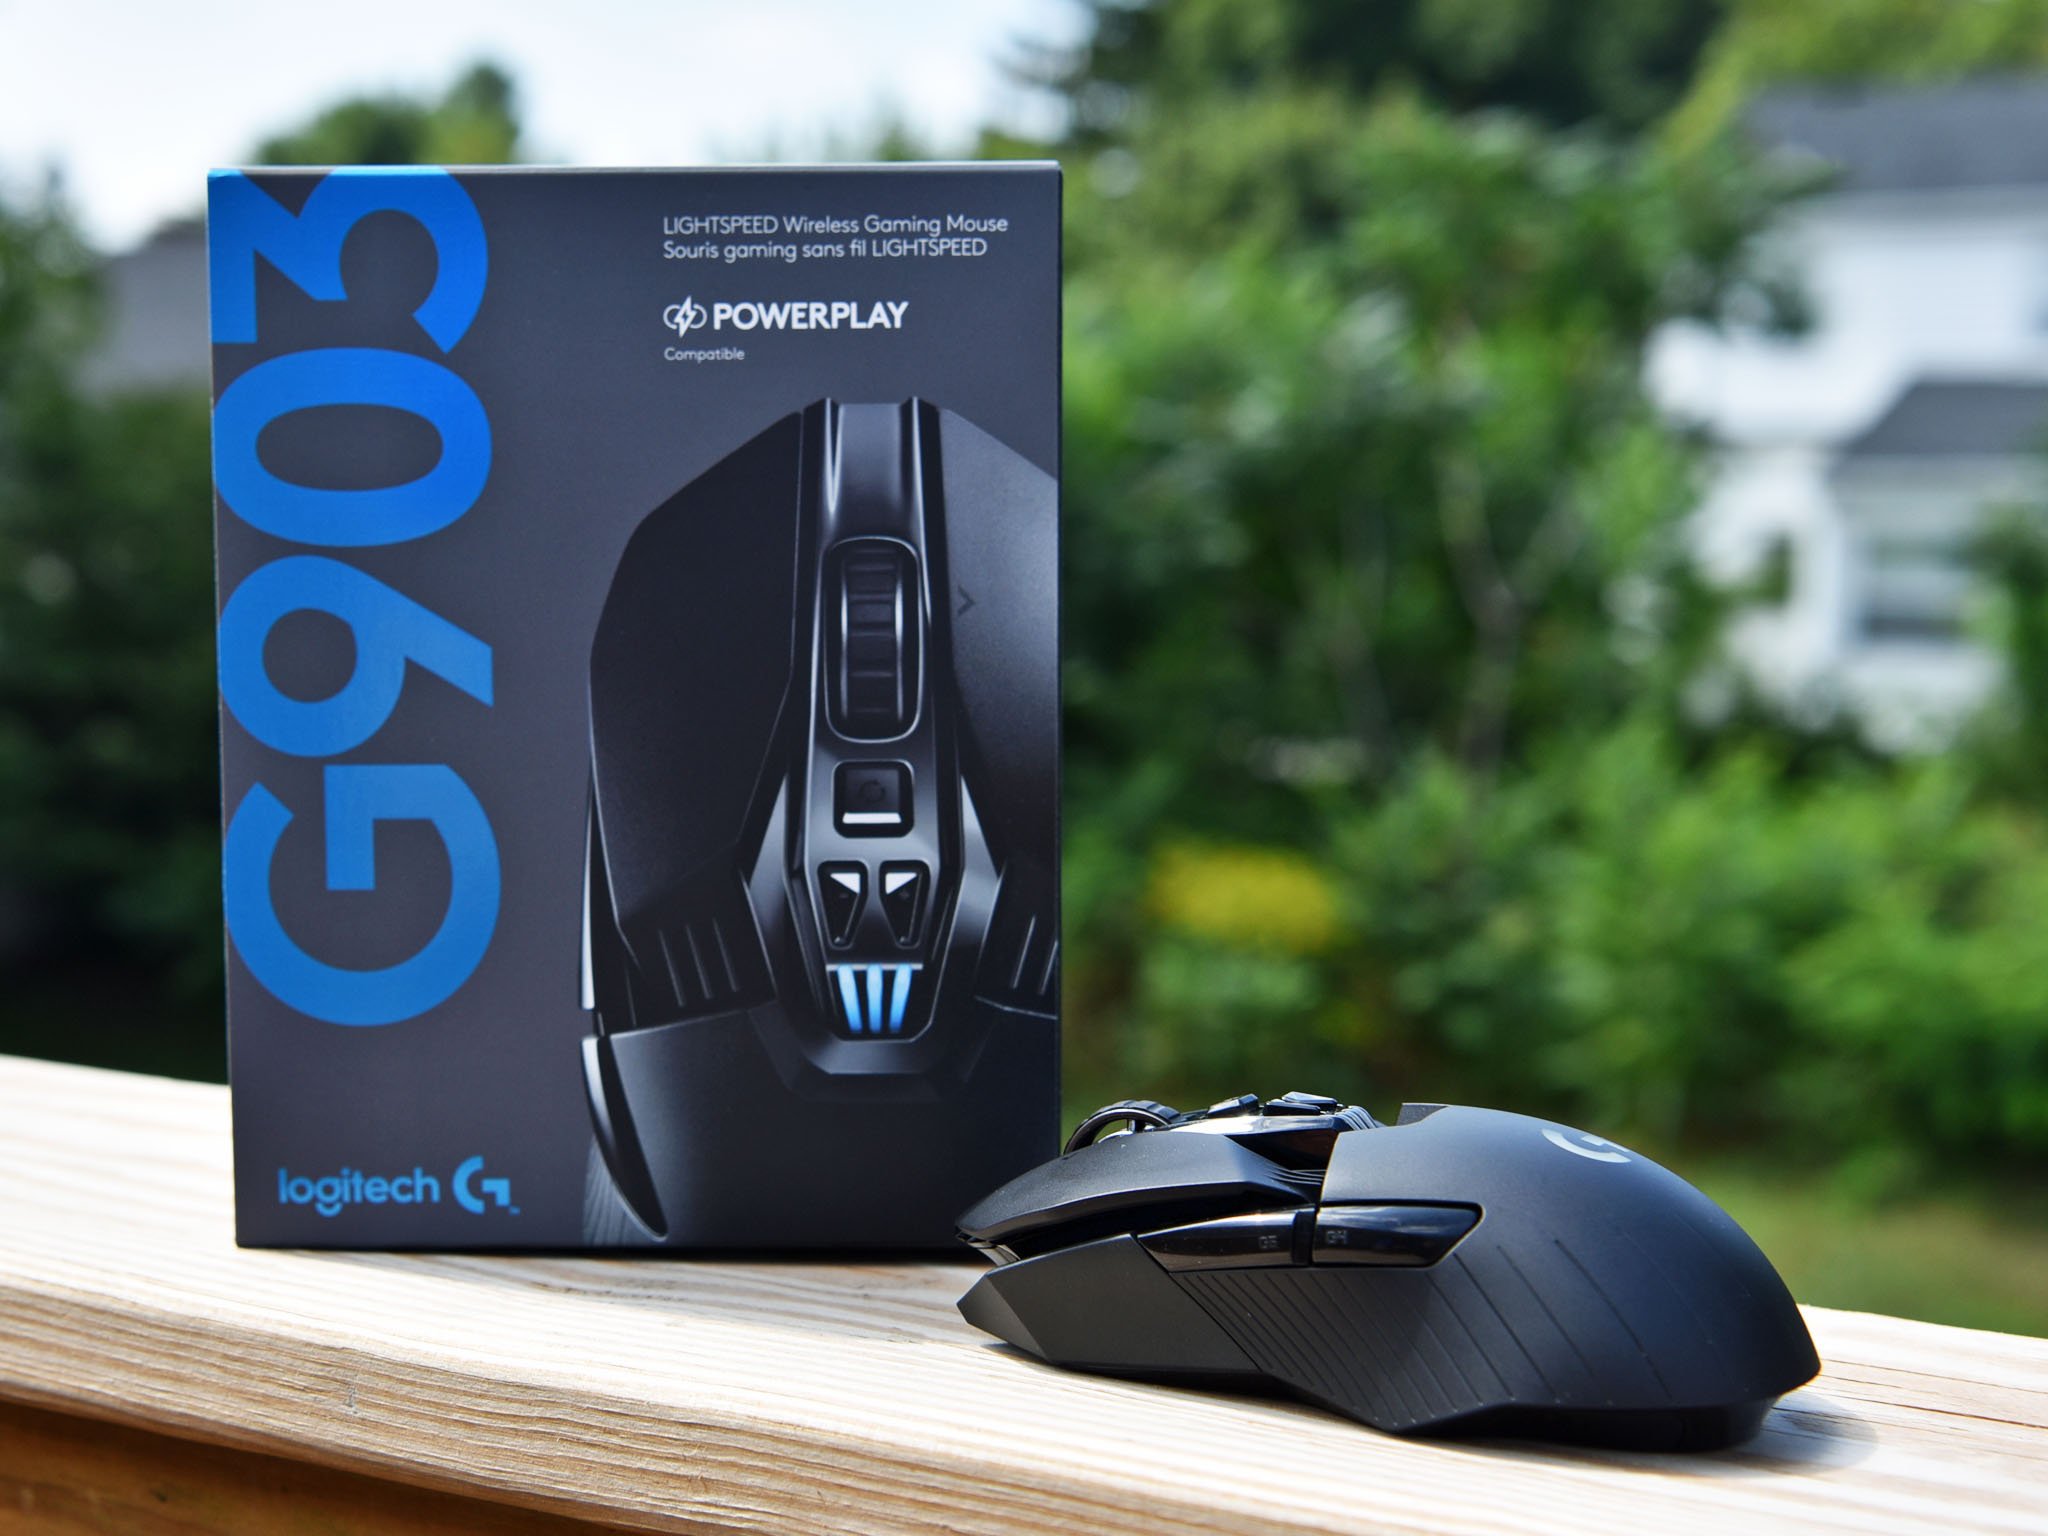 Logitech review: A serious optical gaming mouse with inductive wireless charging | Windows Central